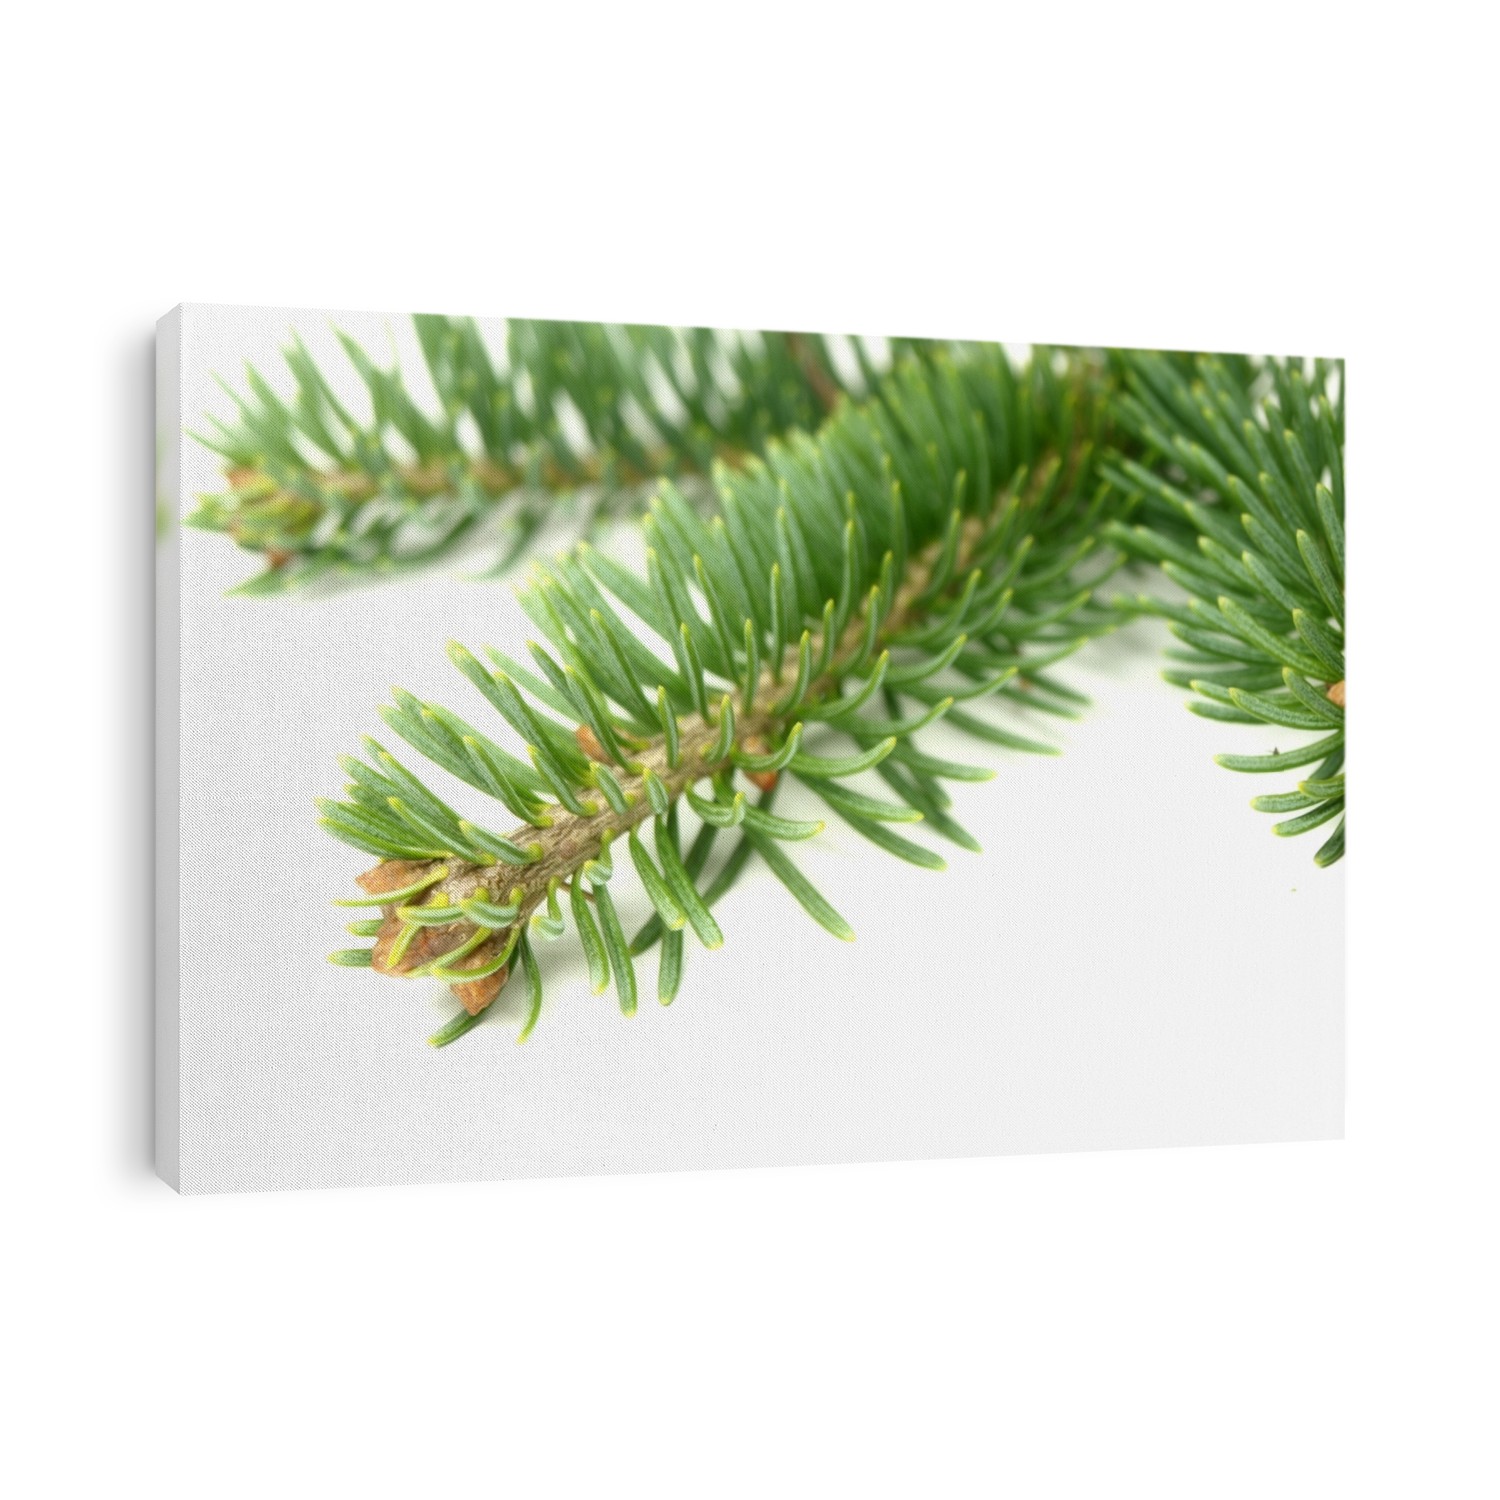 Abies lasiocarpa on white background